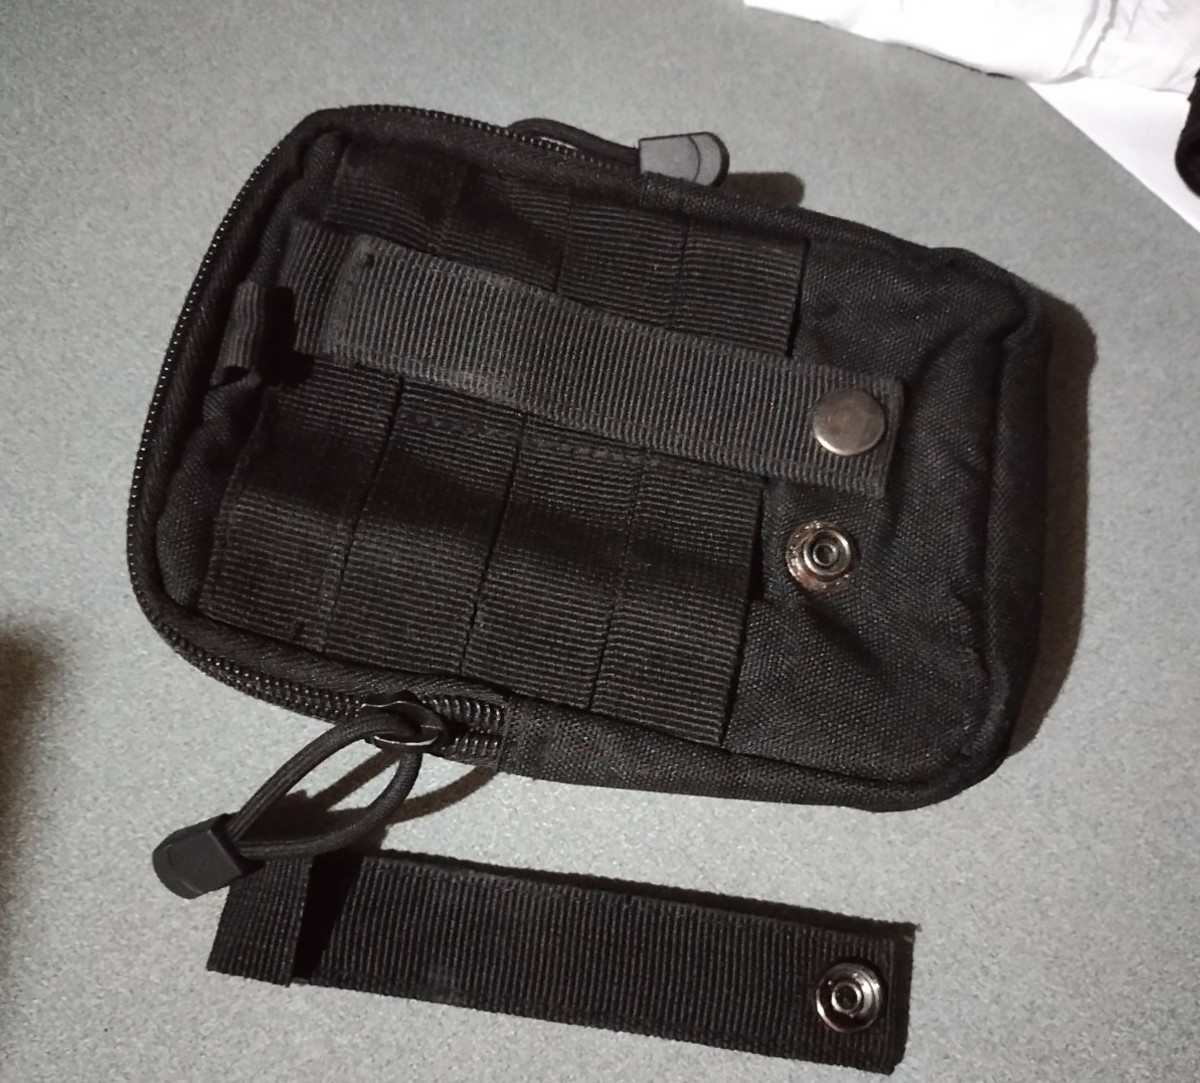 My Cheapo EDC Pouch Failed After 3 Months